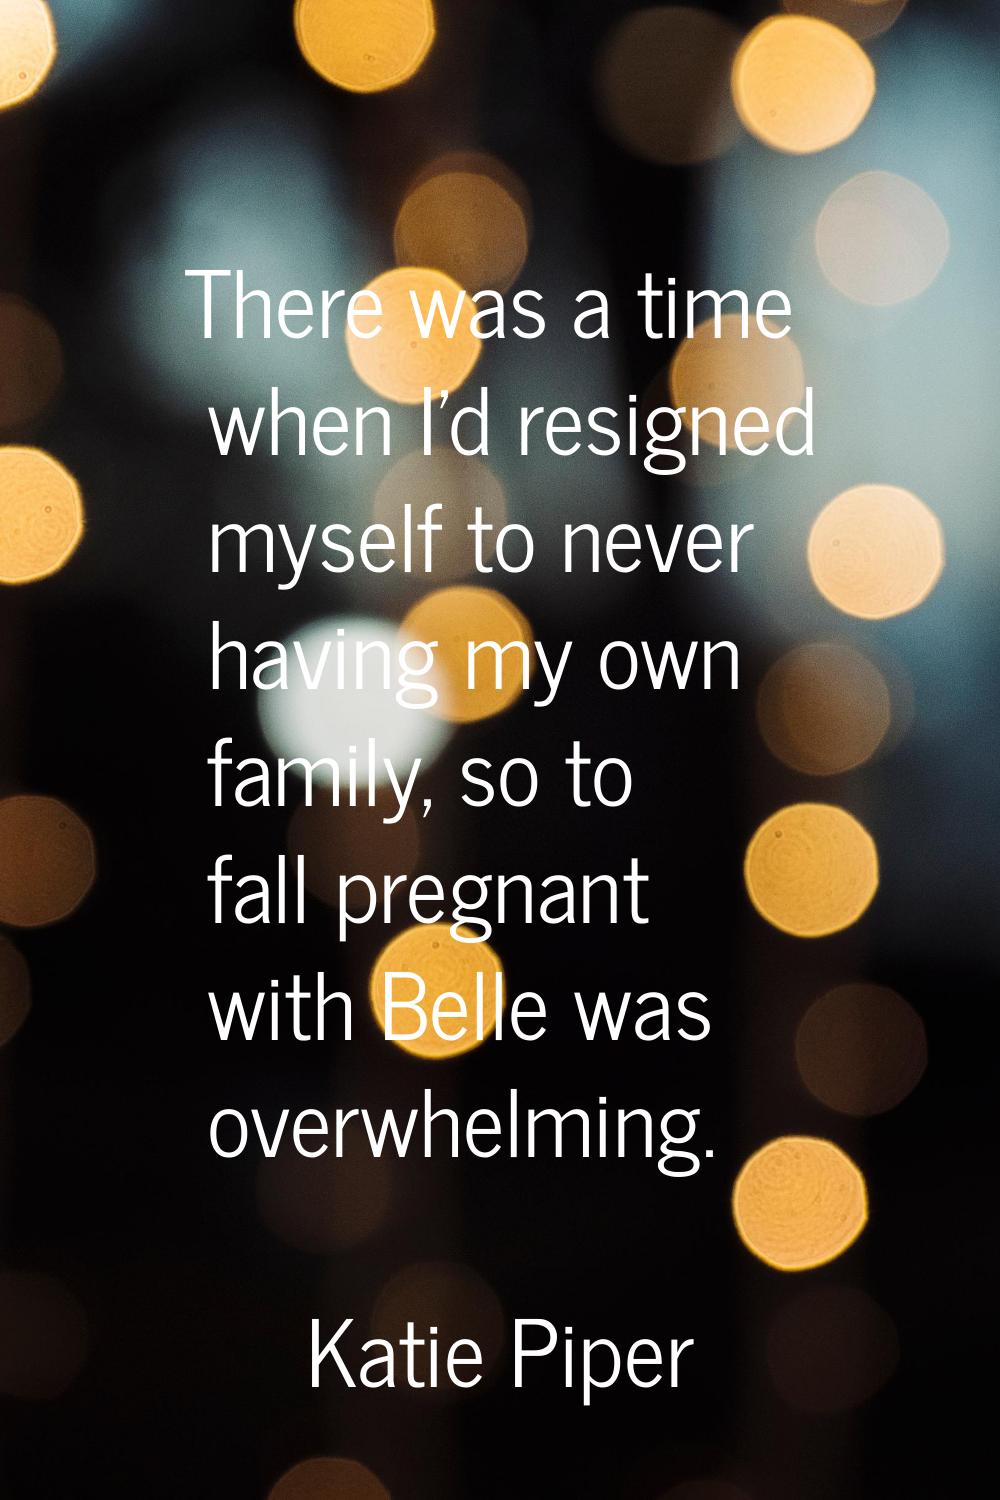 There was a time when I'd resigned myself to never having my own family, so to fall pregnant with B